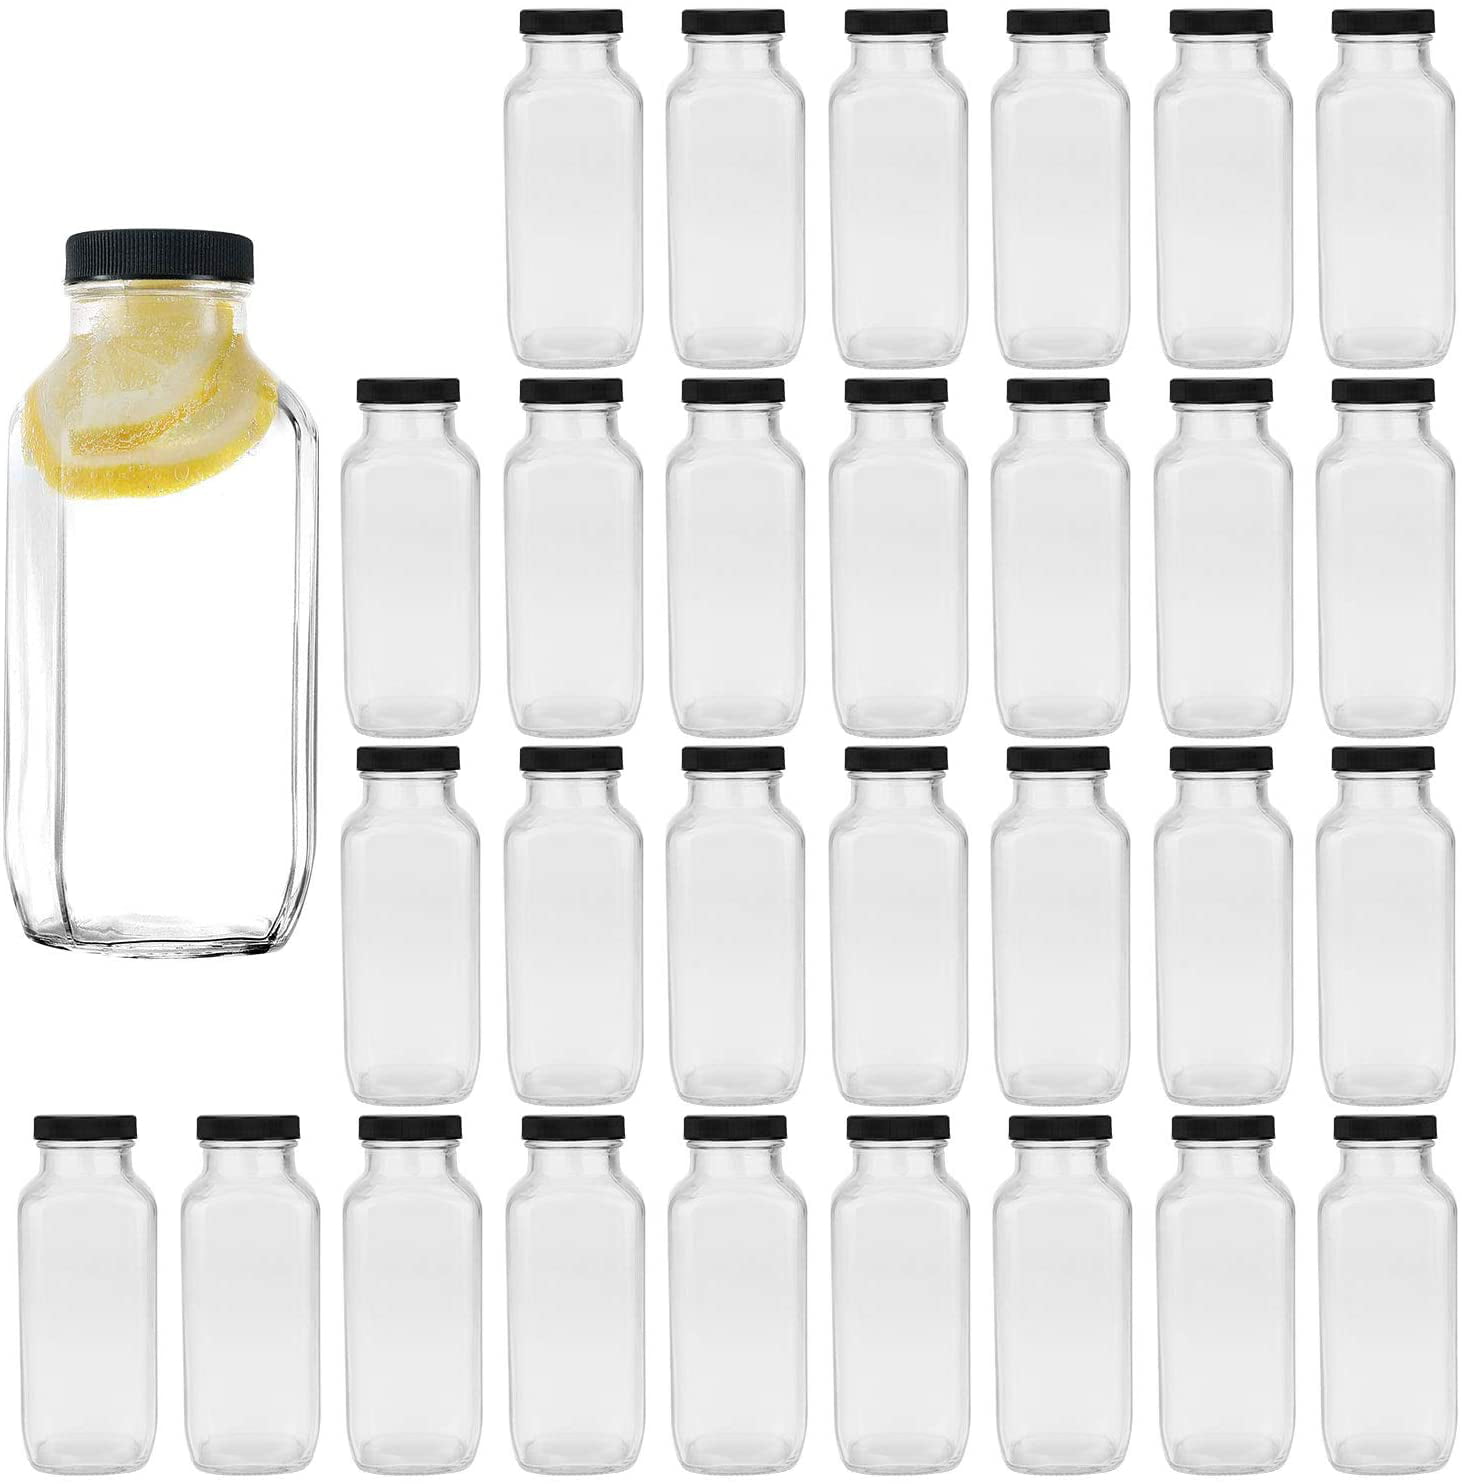 Great for storing Juices Labels and Sponge Brush Included Beverages Milk Kombucha and More Set of 12 Vintage Glass Water Bottles with Lids HINGWAH 16 OZ Glass Drink Bottles